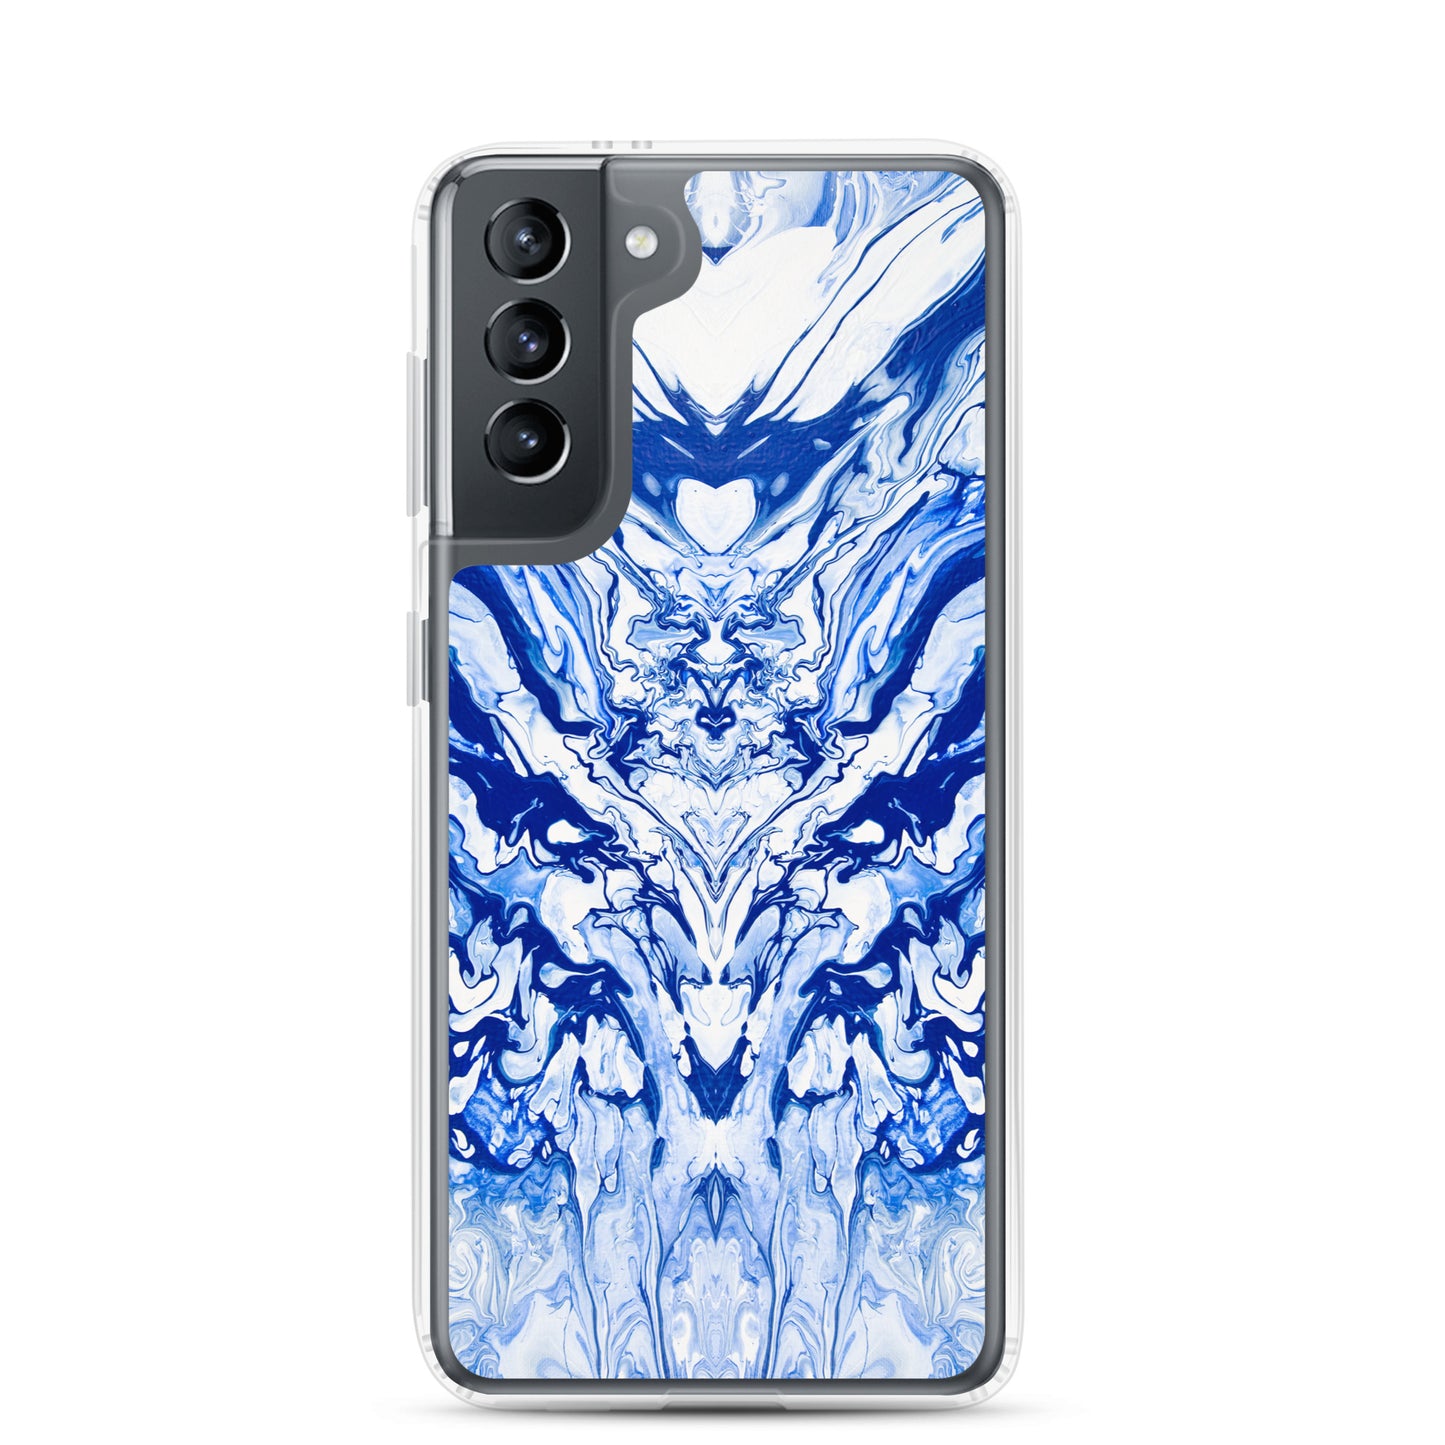 NightOwl Studio Custom Phone Case Compatible with Samsung Galaxy, Slim Cover for Wireless Charging, Drop and Scratch Resistant, Lord Blue